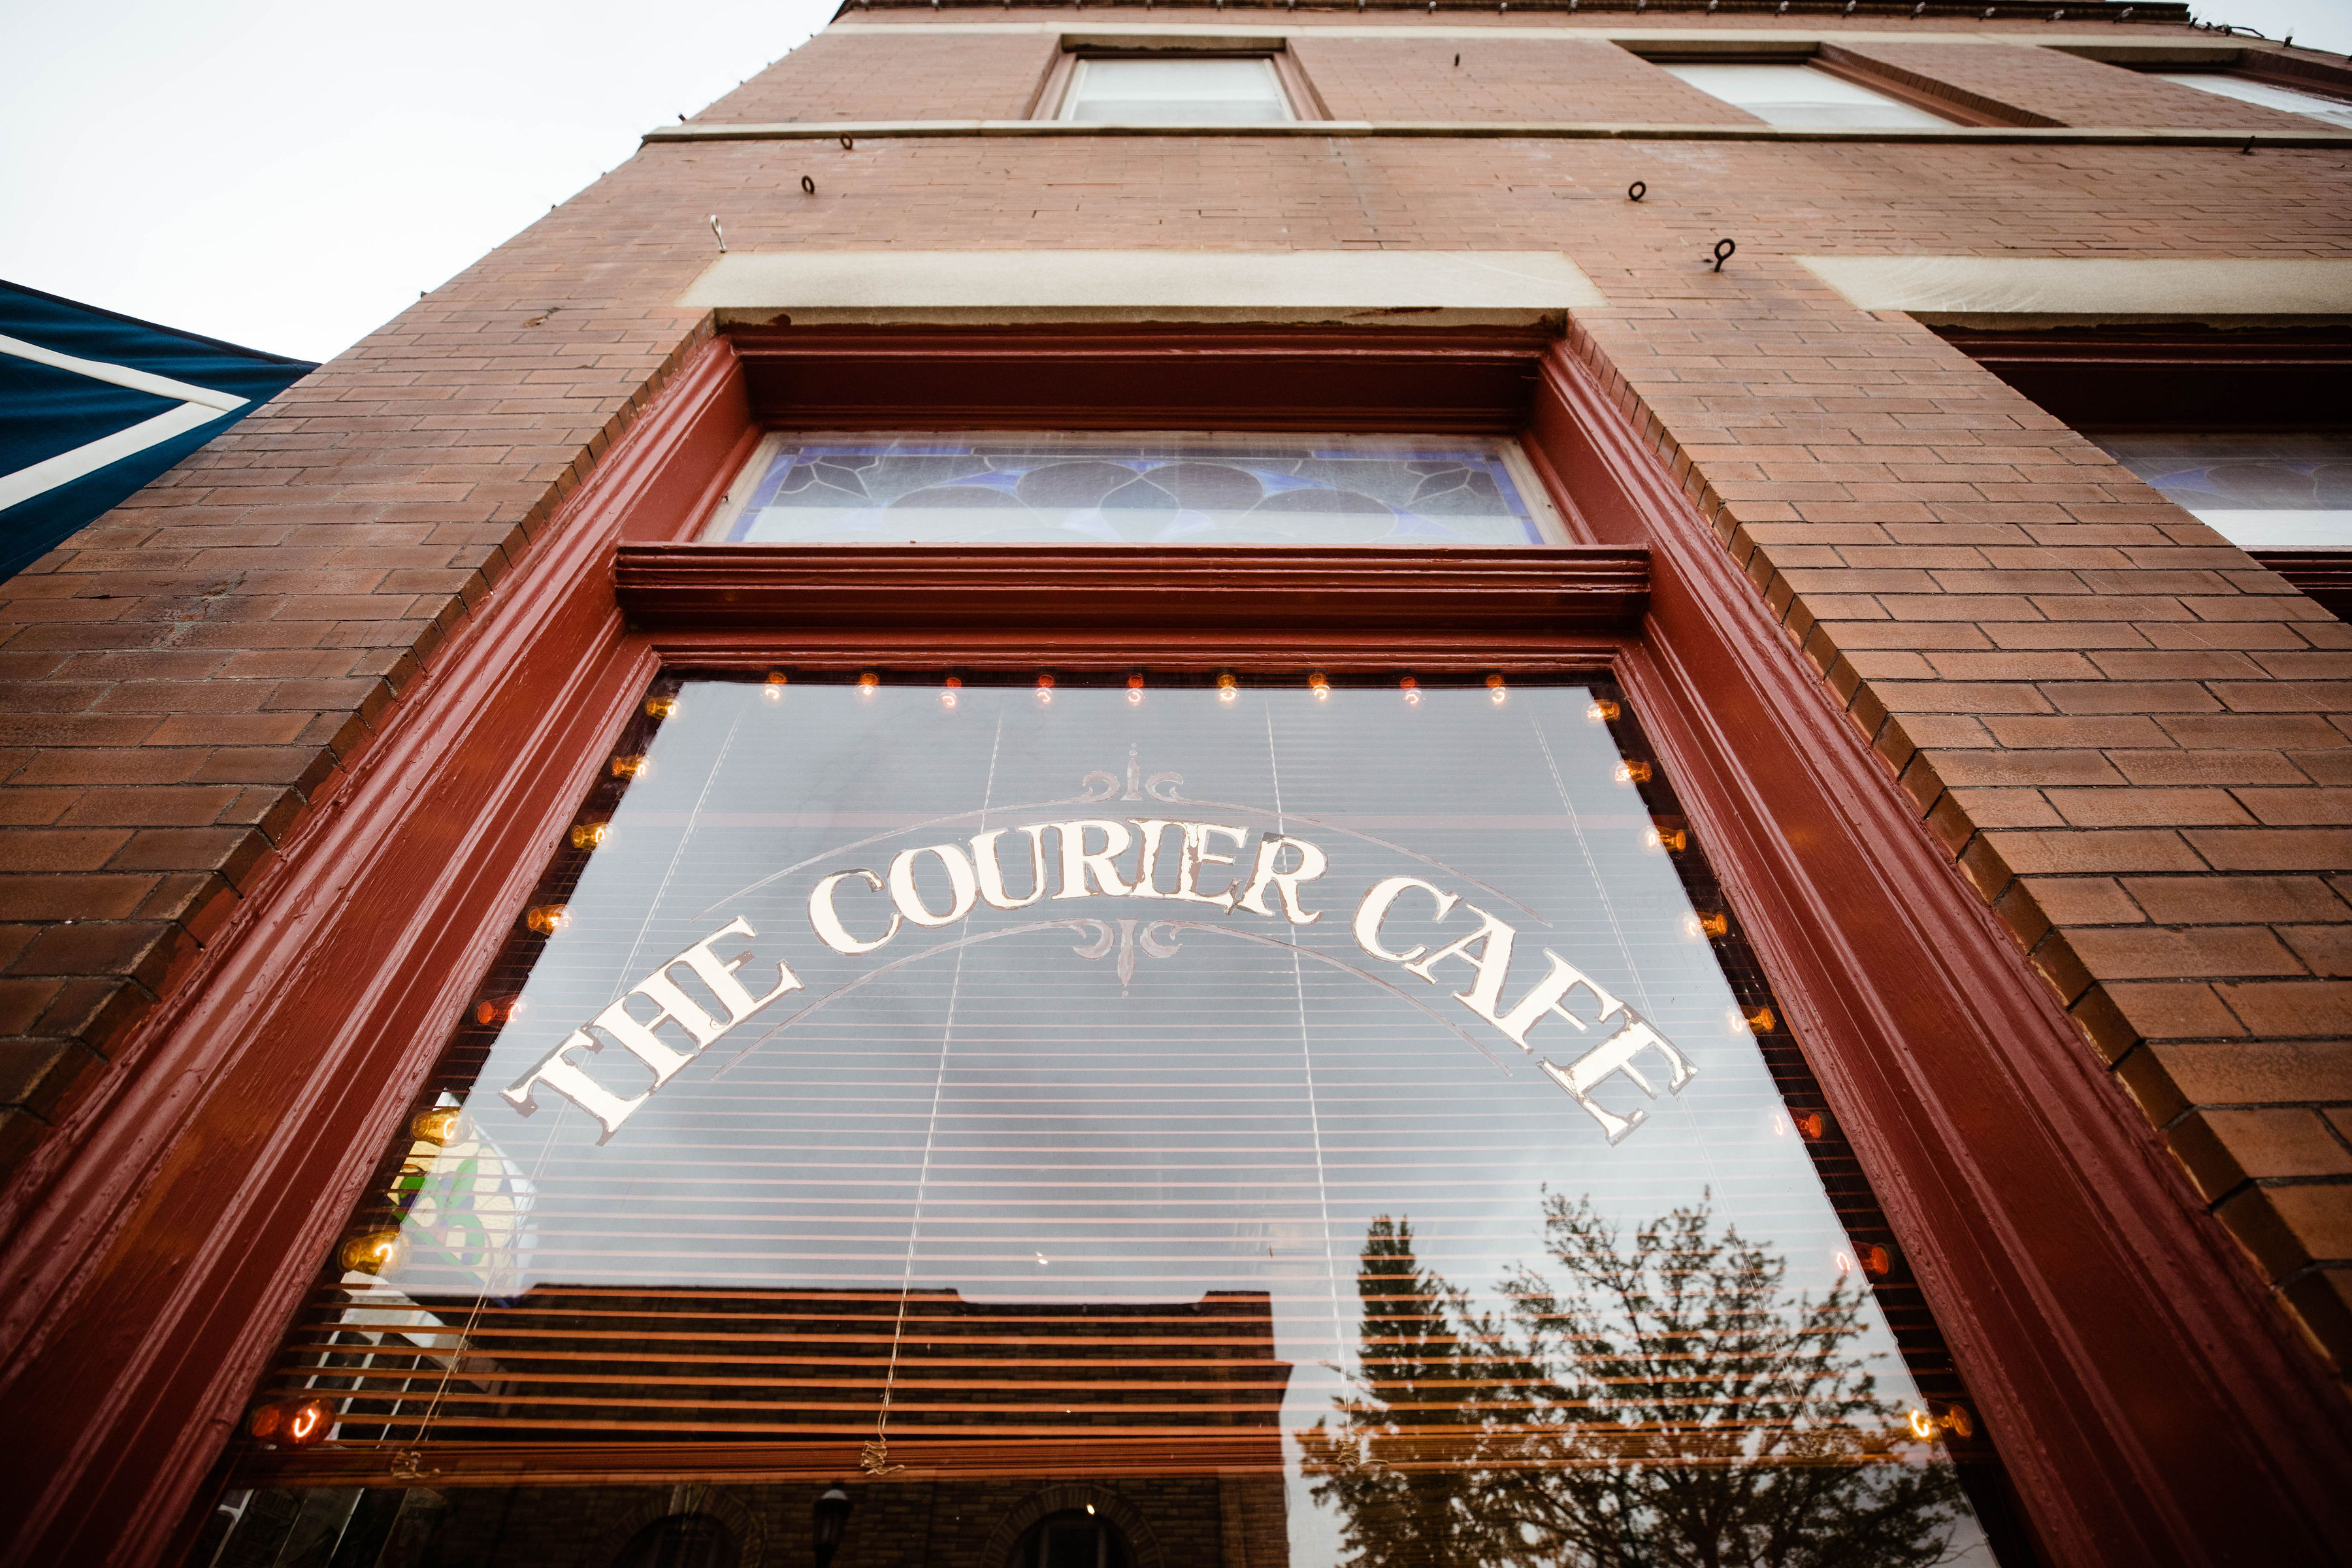 The Courier Cafe will have new ownership soon